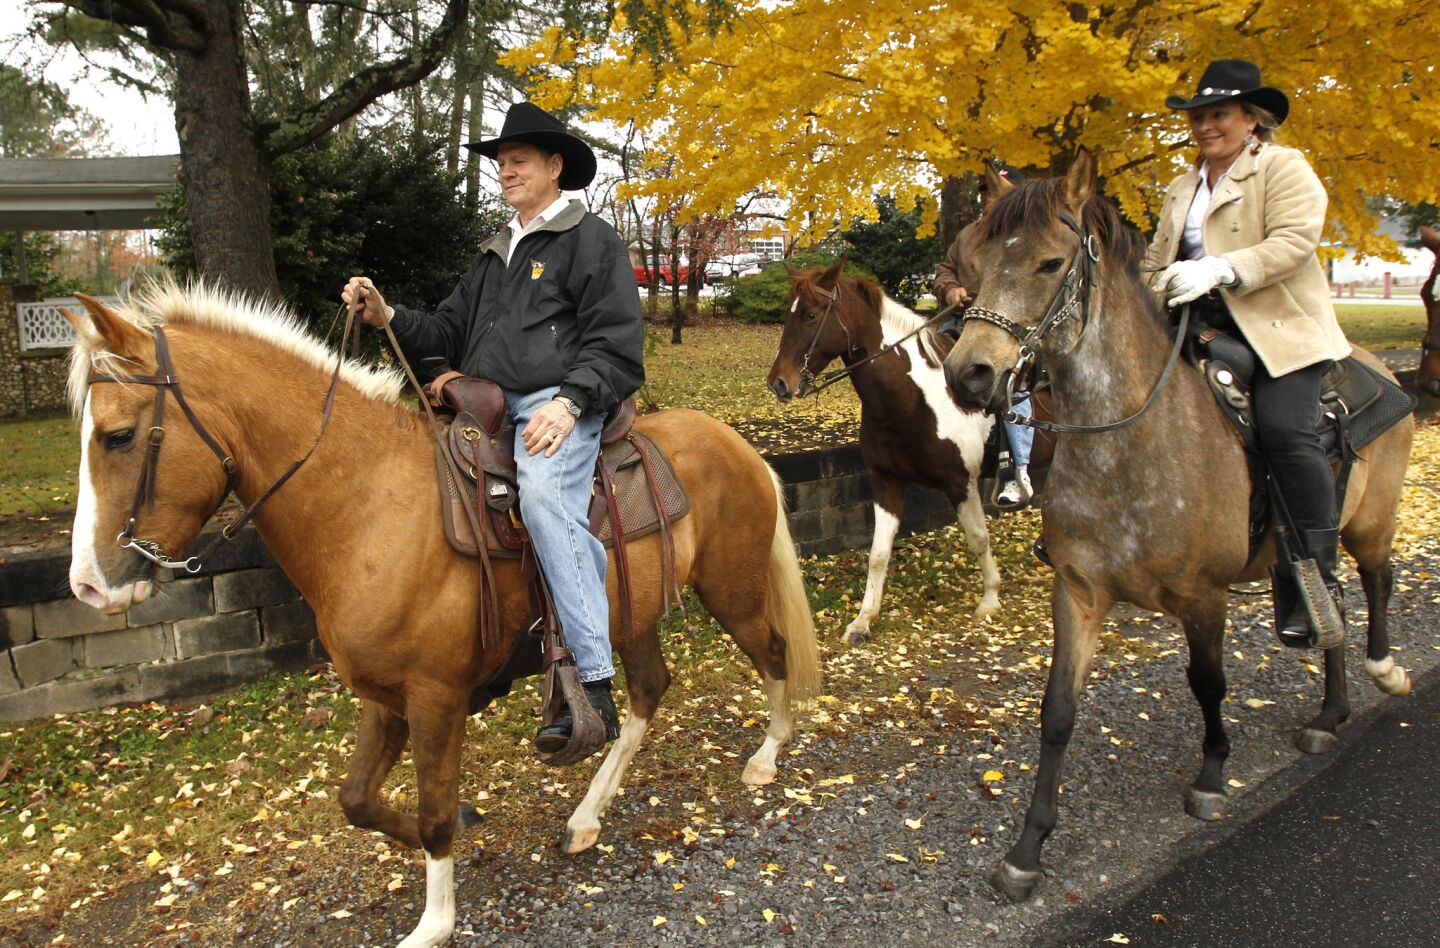 Judge Roy Moore rides his horse with wife Kayla and friends back home after they voted in Gallant, Ala. Moore is running for reelection to be chief justice of the Alabama Supreme Court.